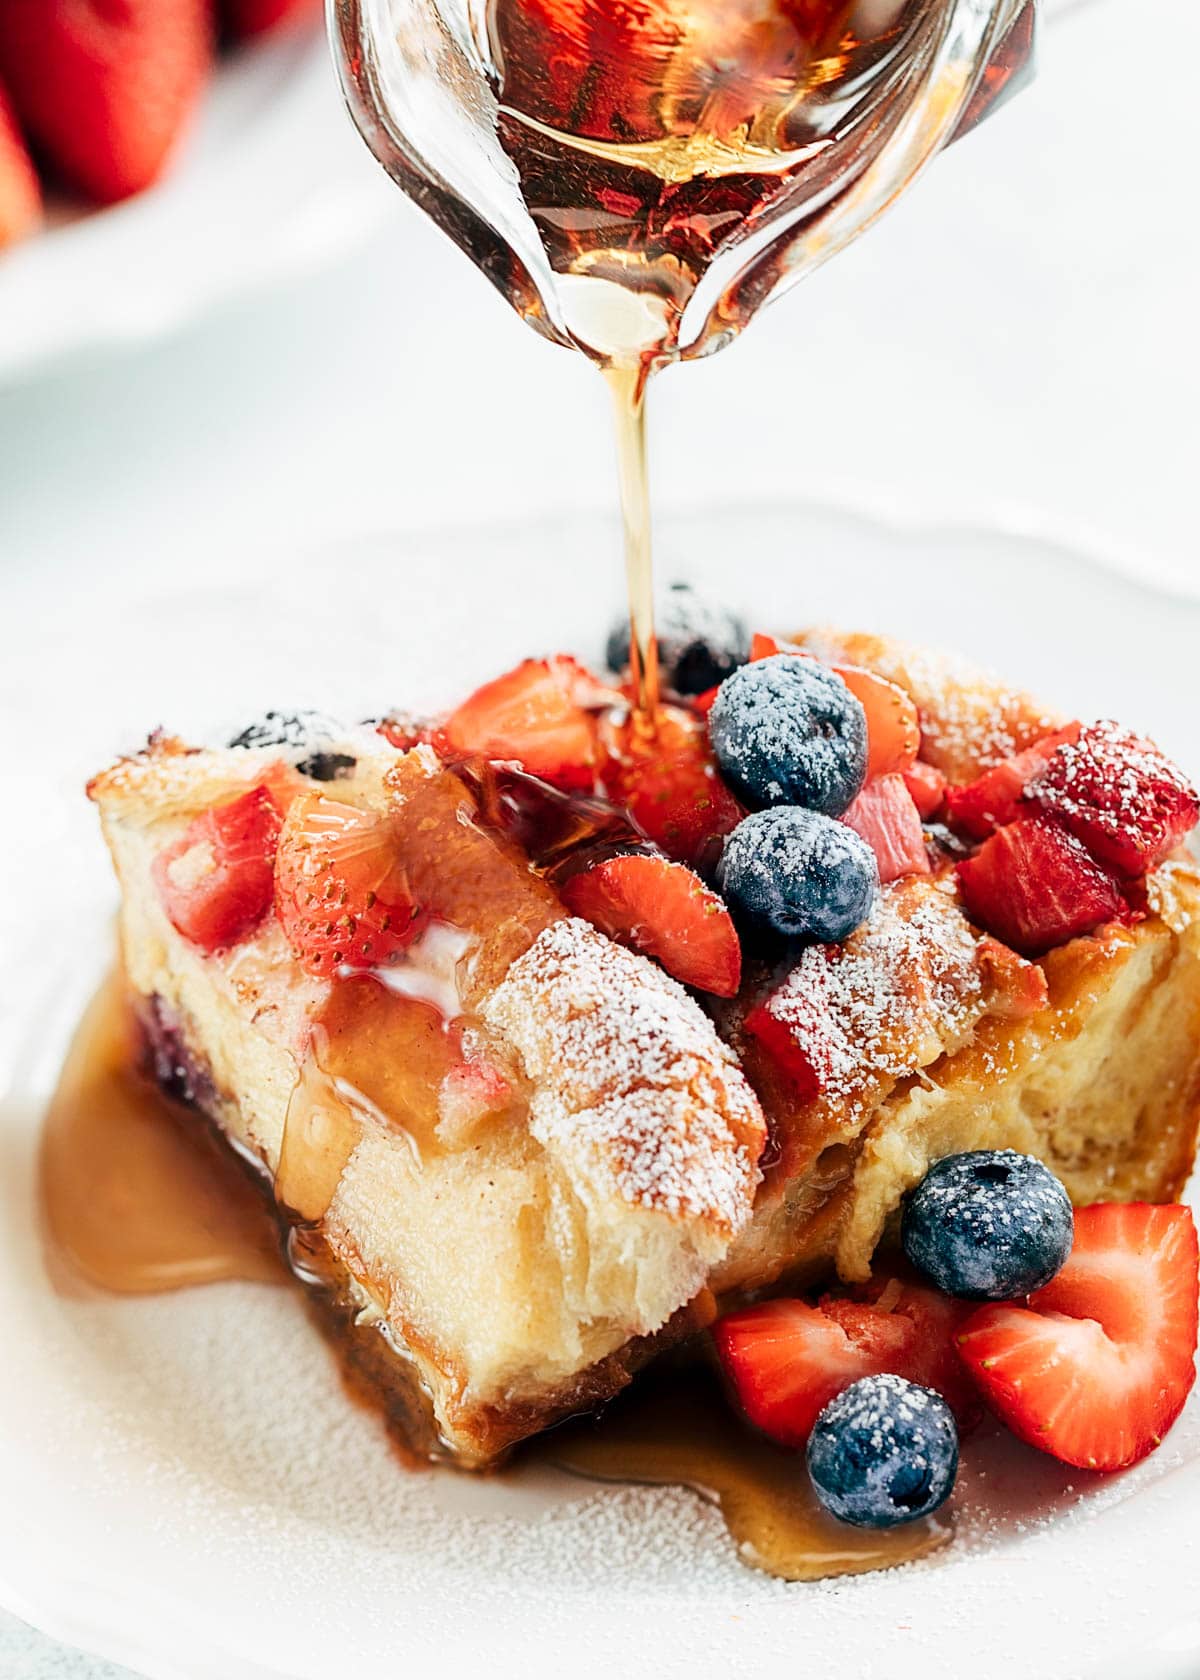 wedge of croissant french toast bake with berries on a white plate, with rum maple syrup being poured over the top